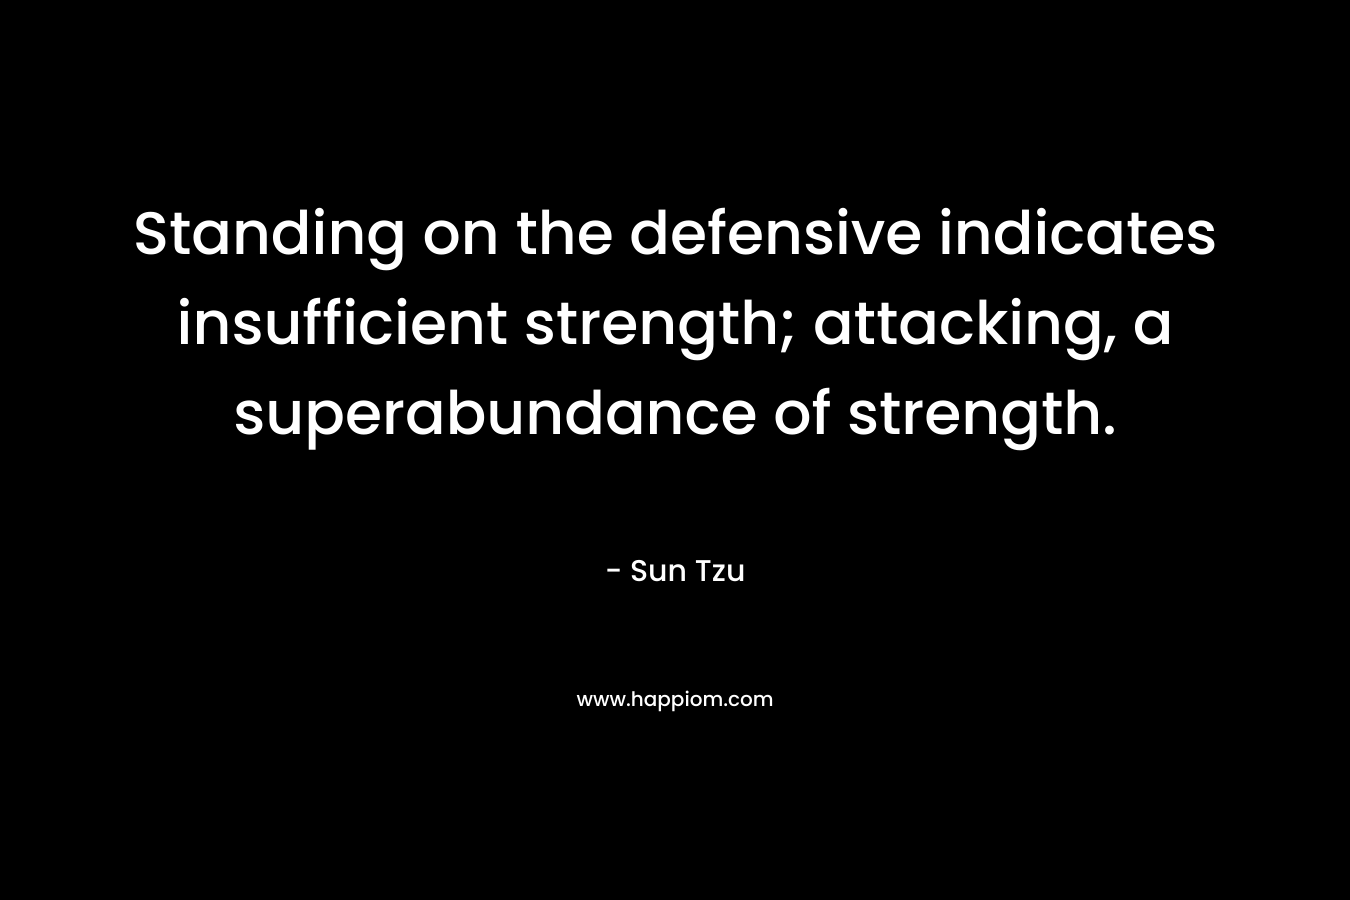 Standing on the defensive indicates insufficient strength; attacking, a superabundance of strength.